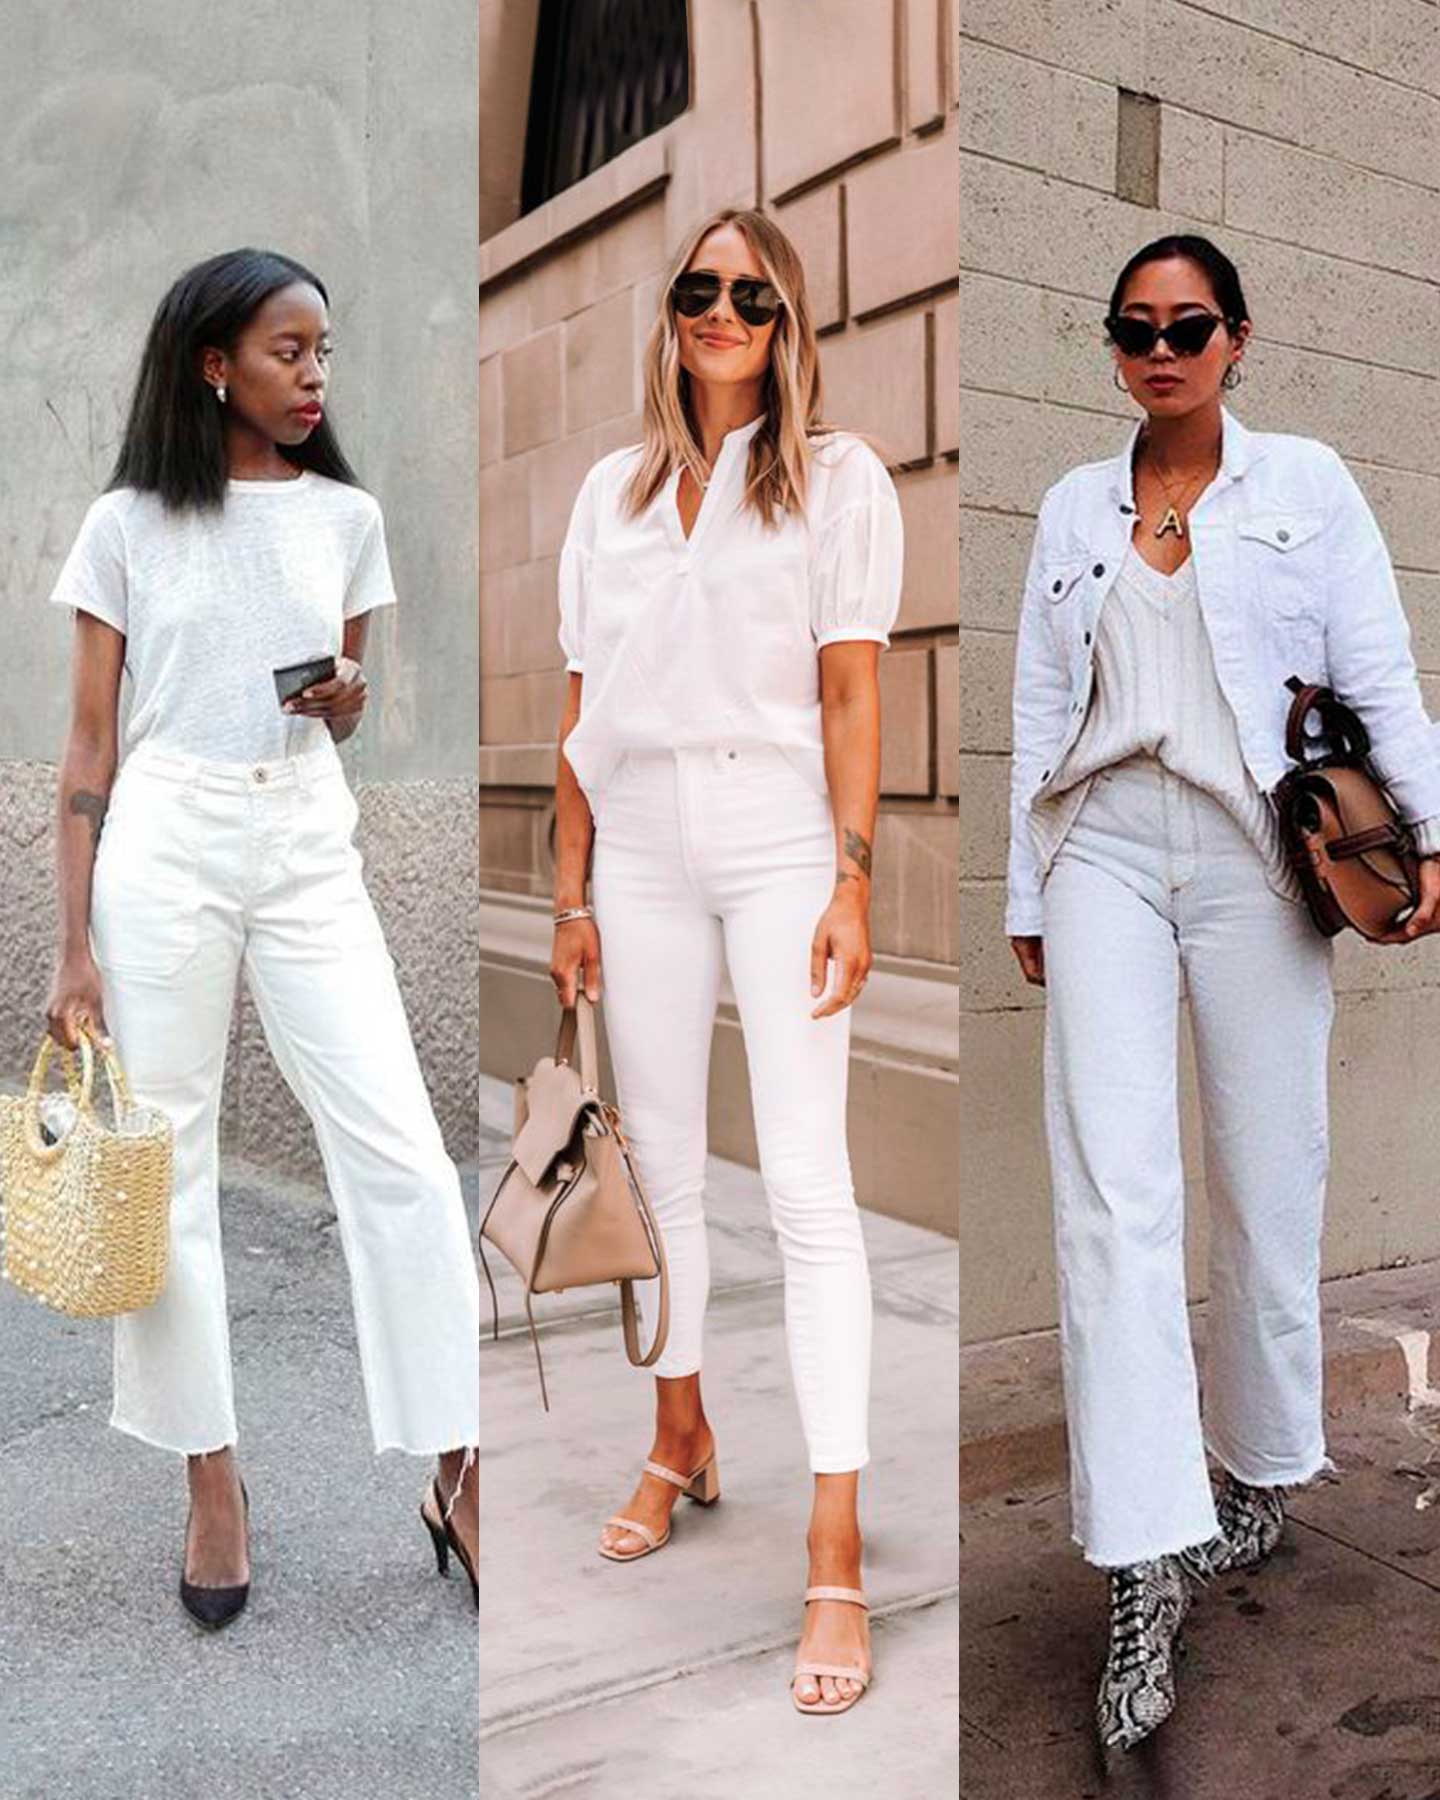 25 Ways to Style Baggy Jeans With Everything, From Blazers to Crop Tops   Straight leg jeans outfits, White shirt and jeans, White shirt outfits